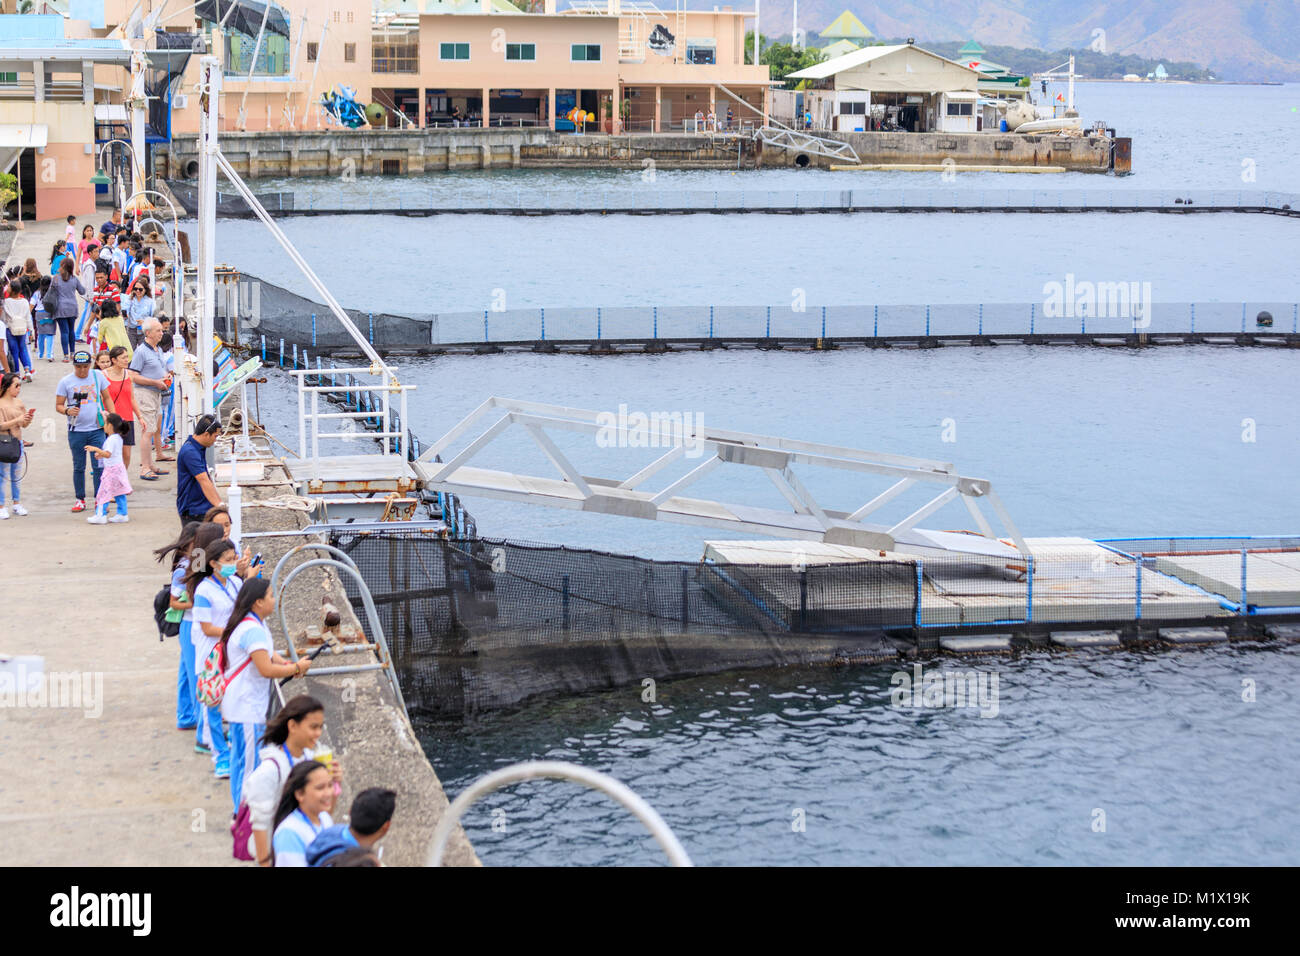 SUBIC BAY, MANILA, PHILIPPINES : JAN 28, 2018 - Encounter area of Shark and Turtle with people waiting them in Subic Ocean Adventure Stock Photo